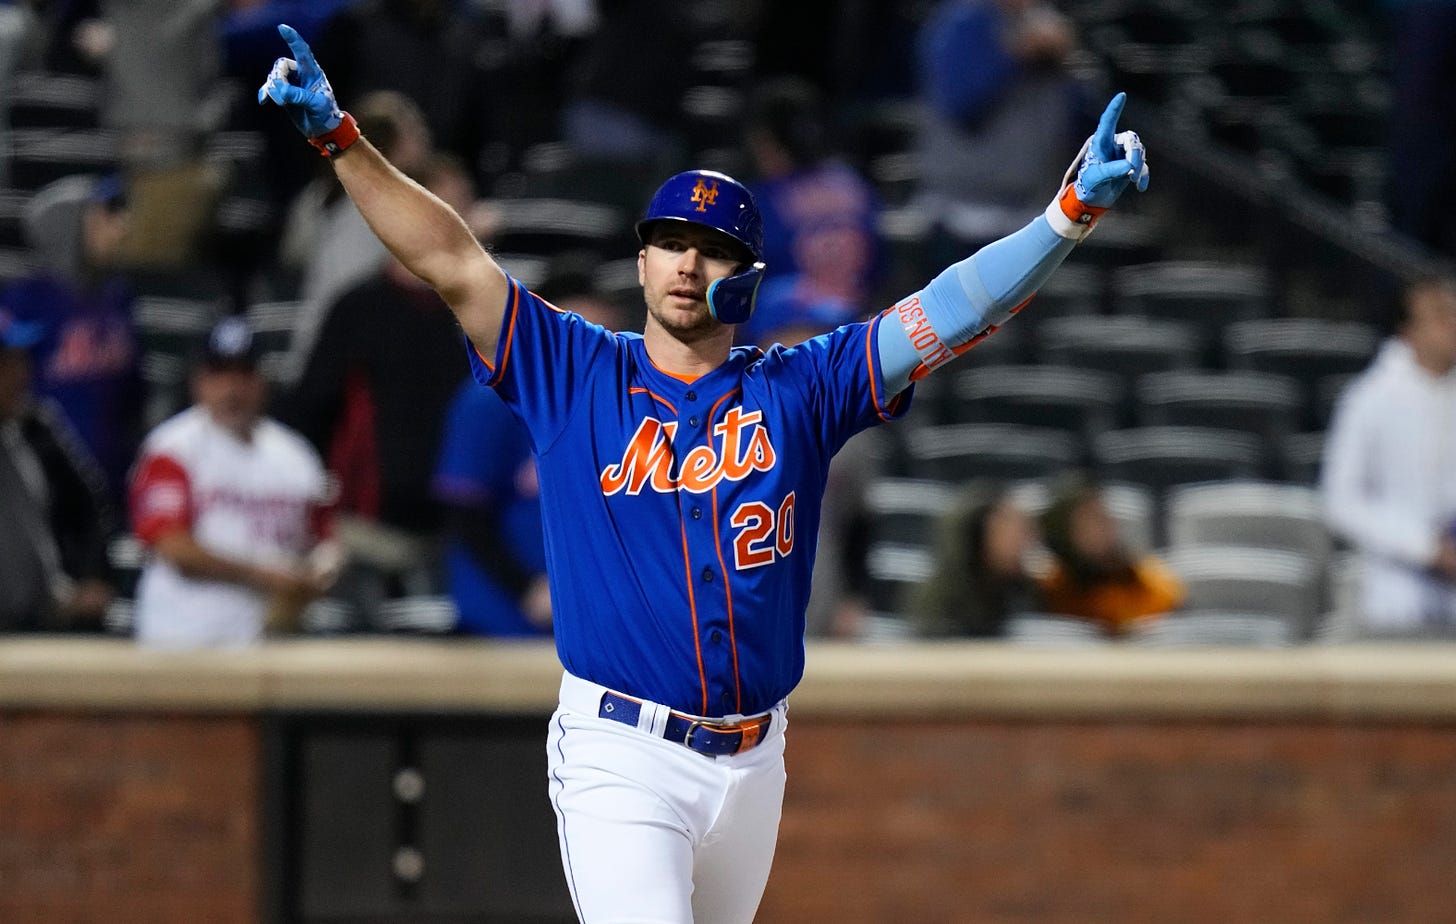 Pete Alonso, arms raised, after hitting a walkoff home run